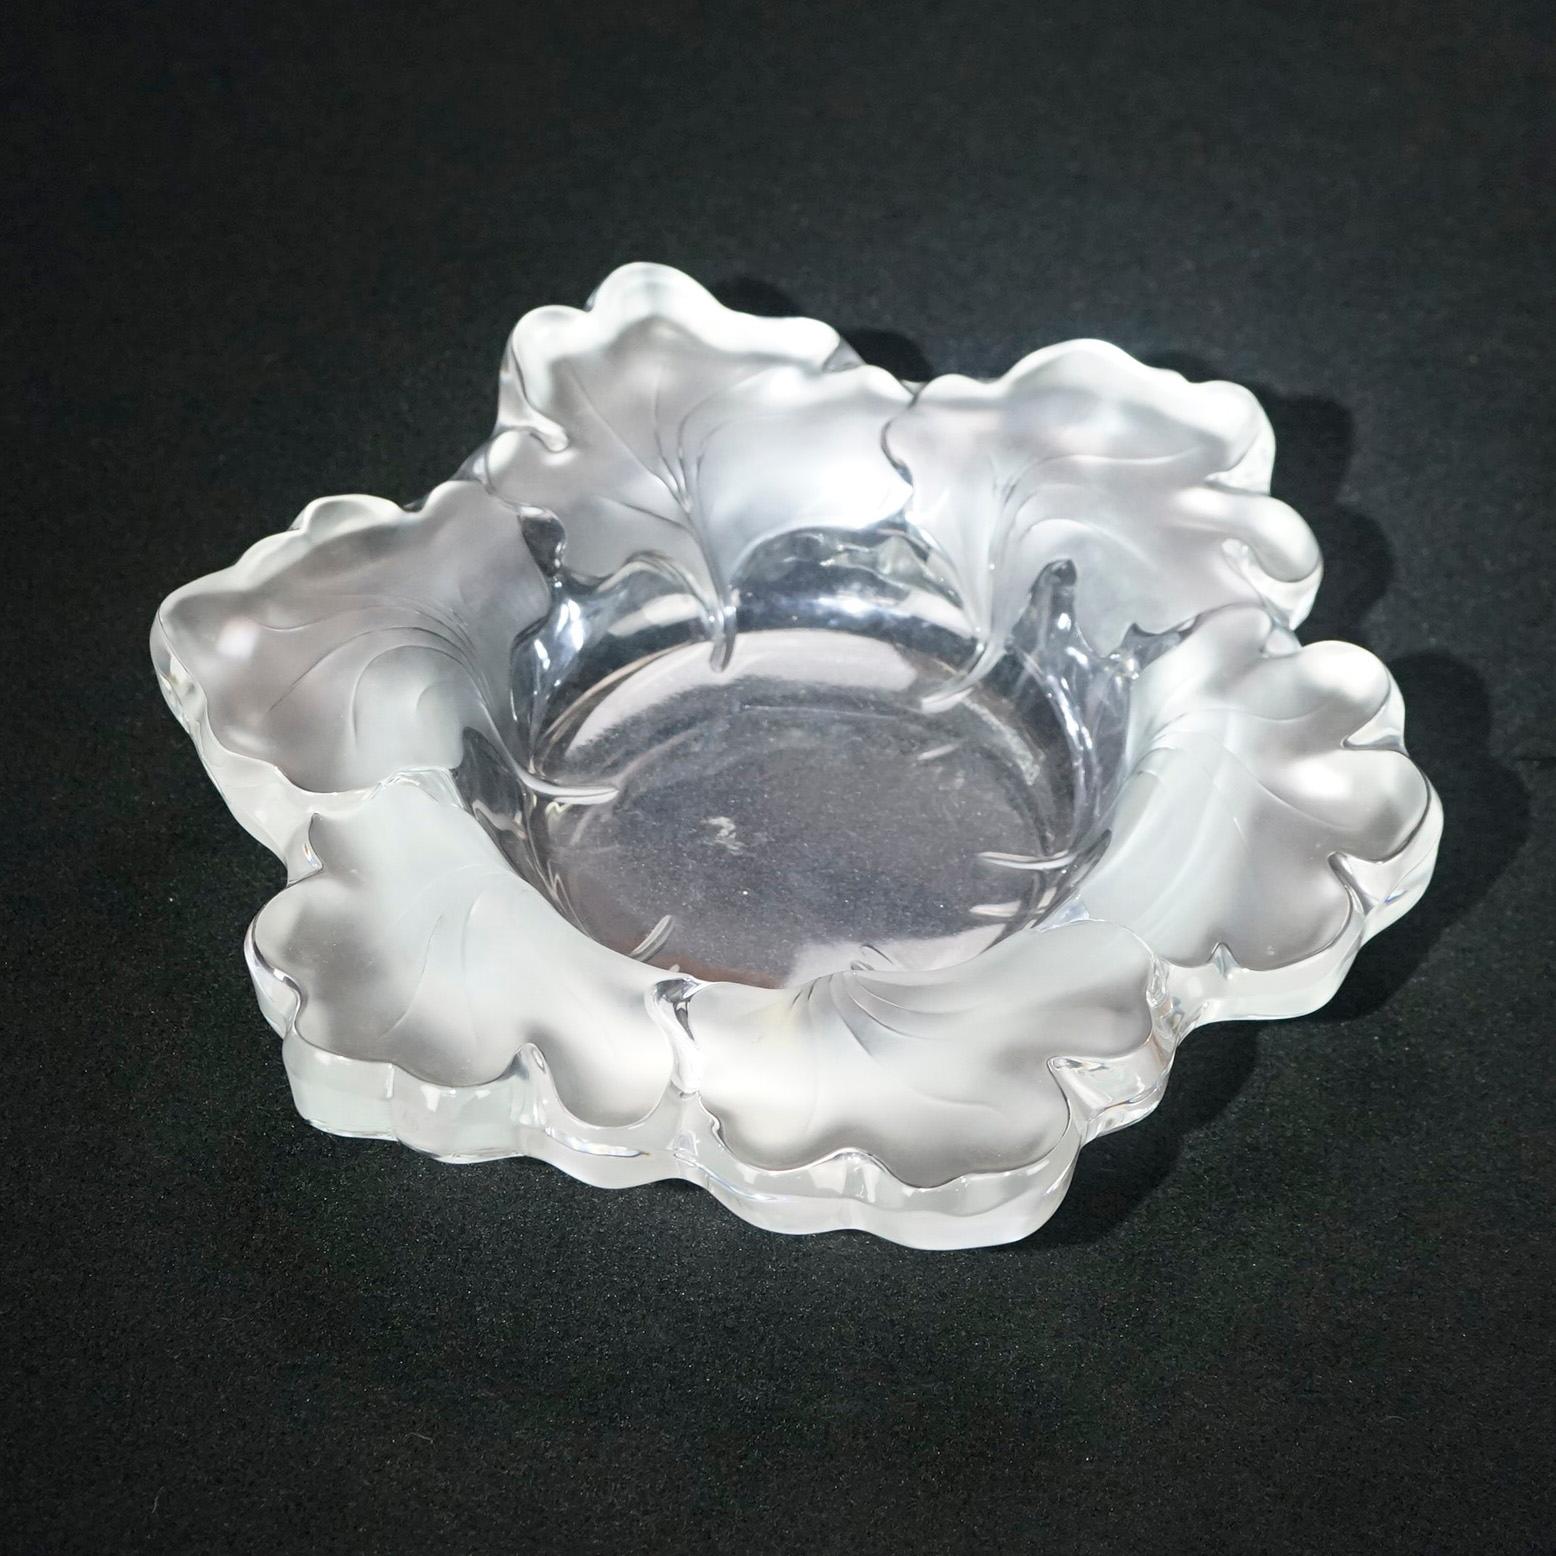 20th Century French Lalique Art Glass Leaf Form Center Bowl 20th C